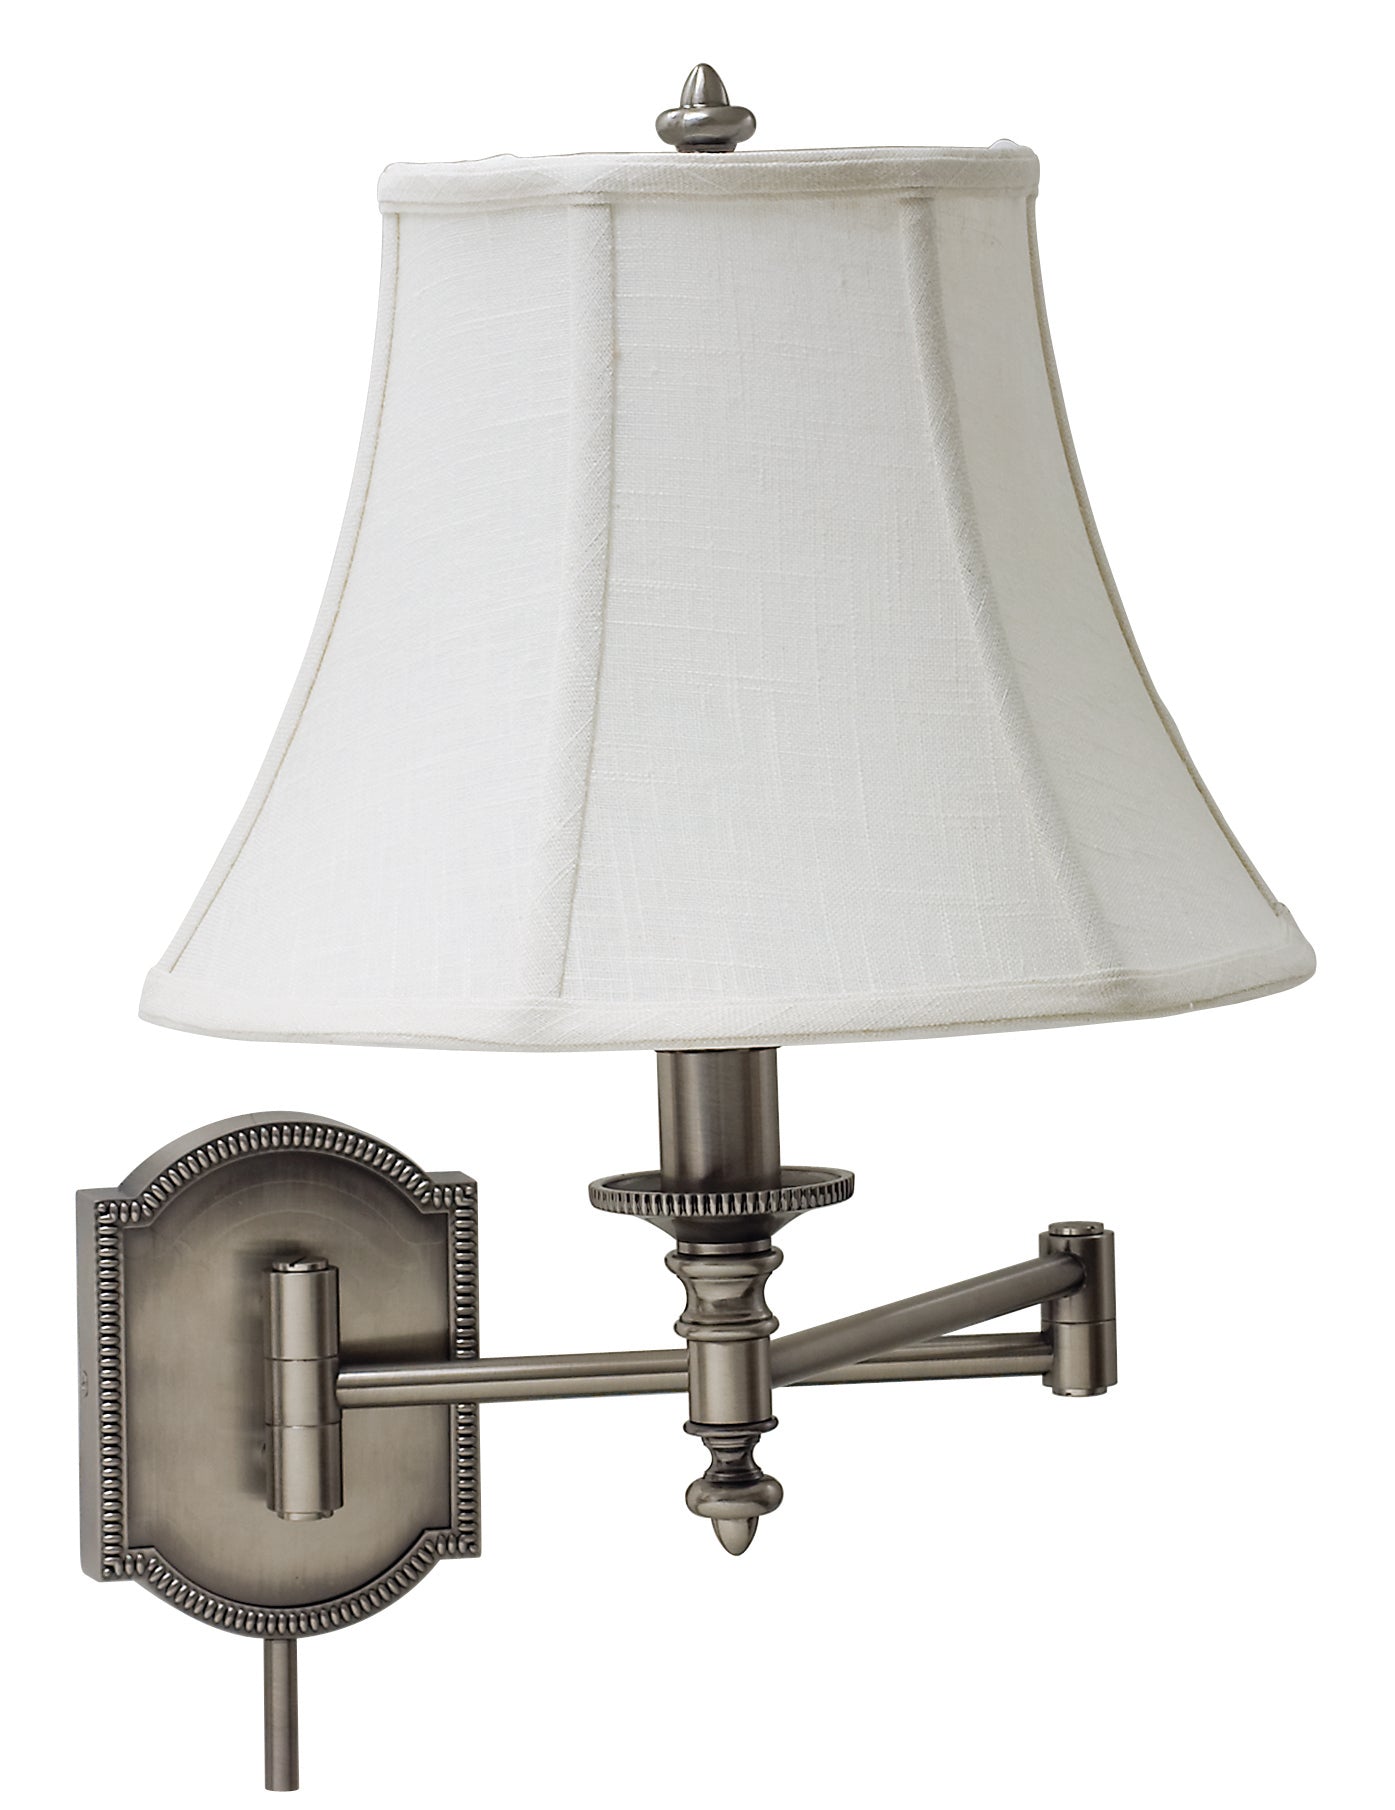 House of Troy Wall Swing Arm Lamp in Antique Silver WS761-AS